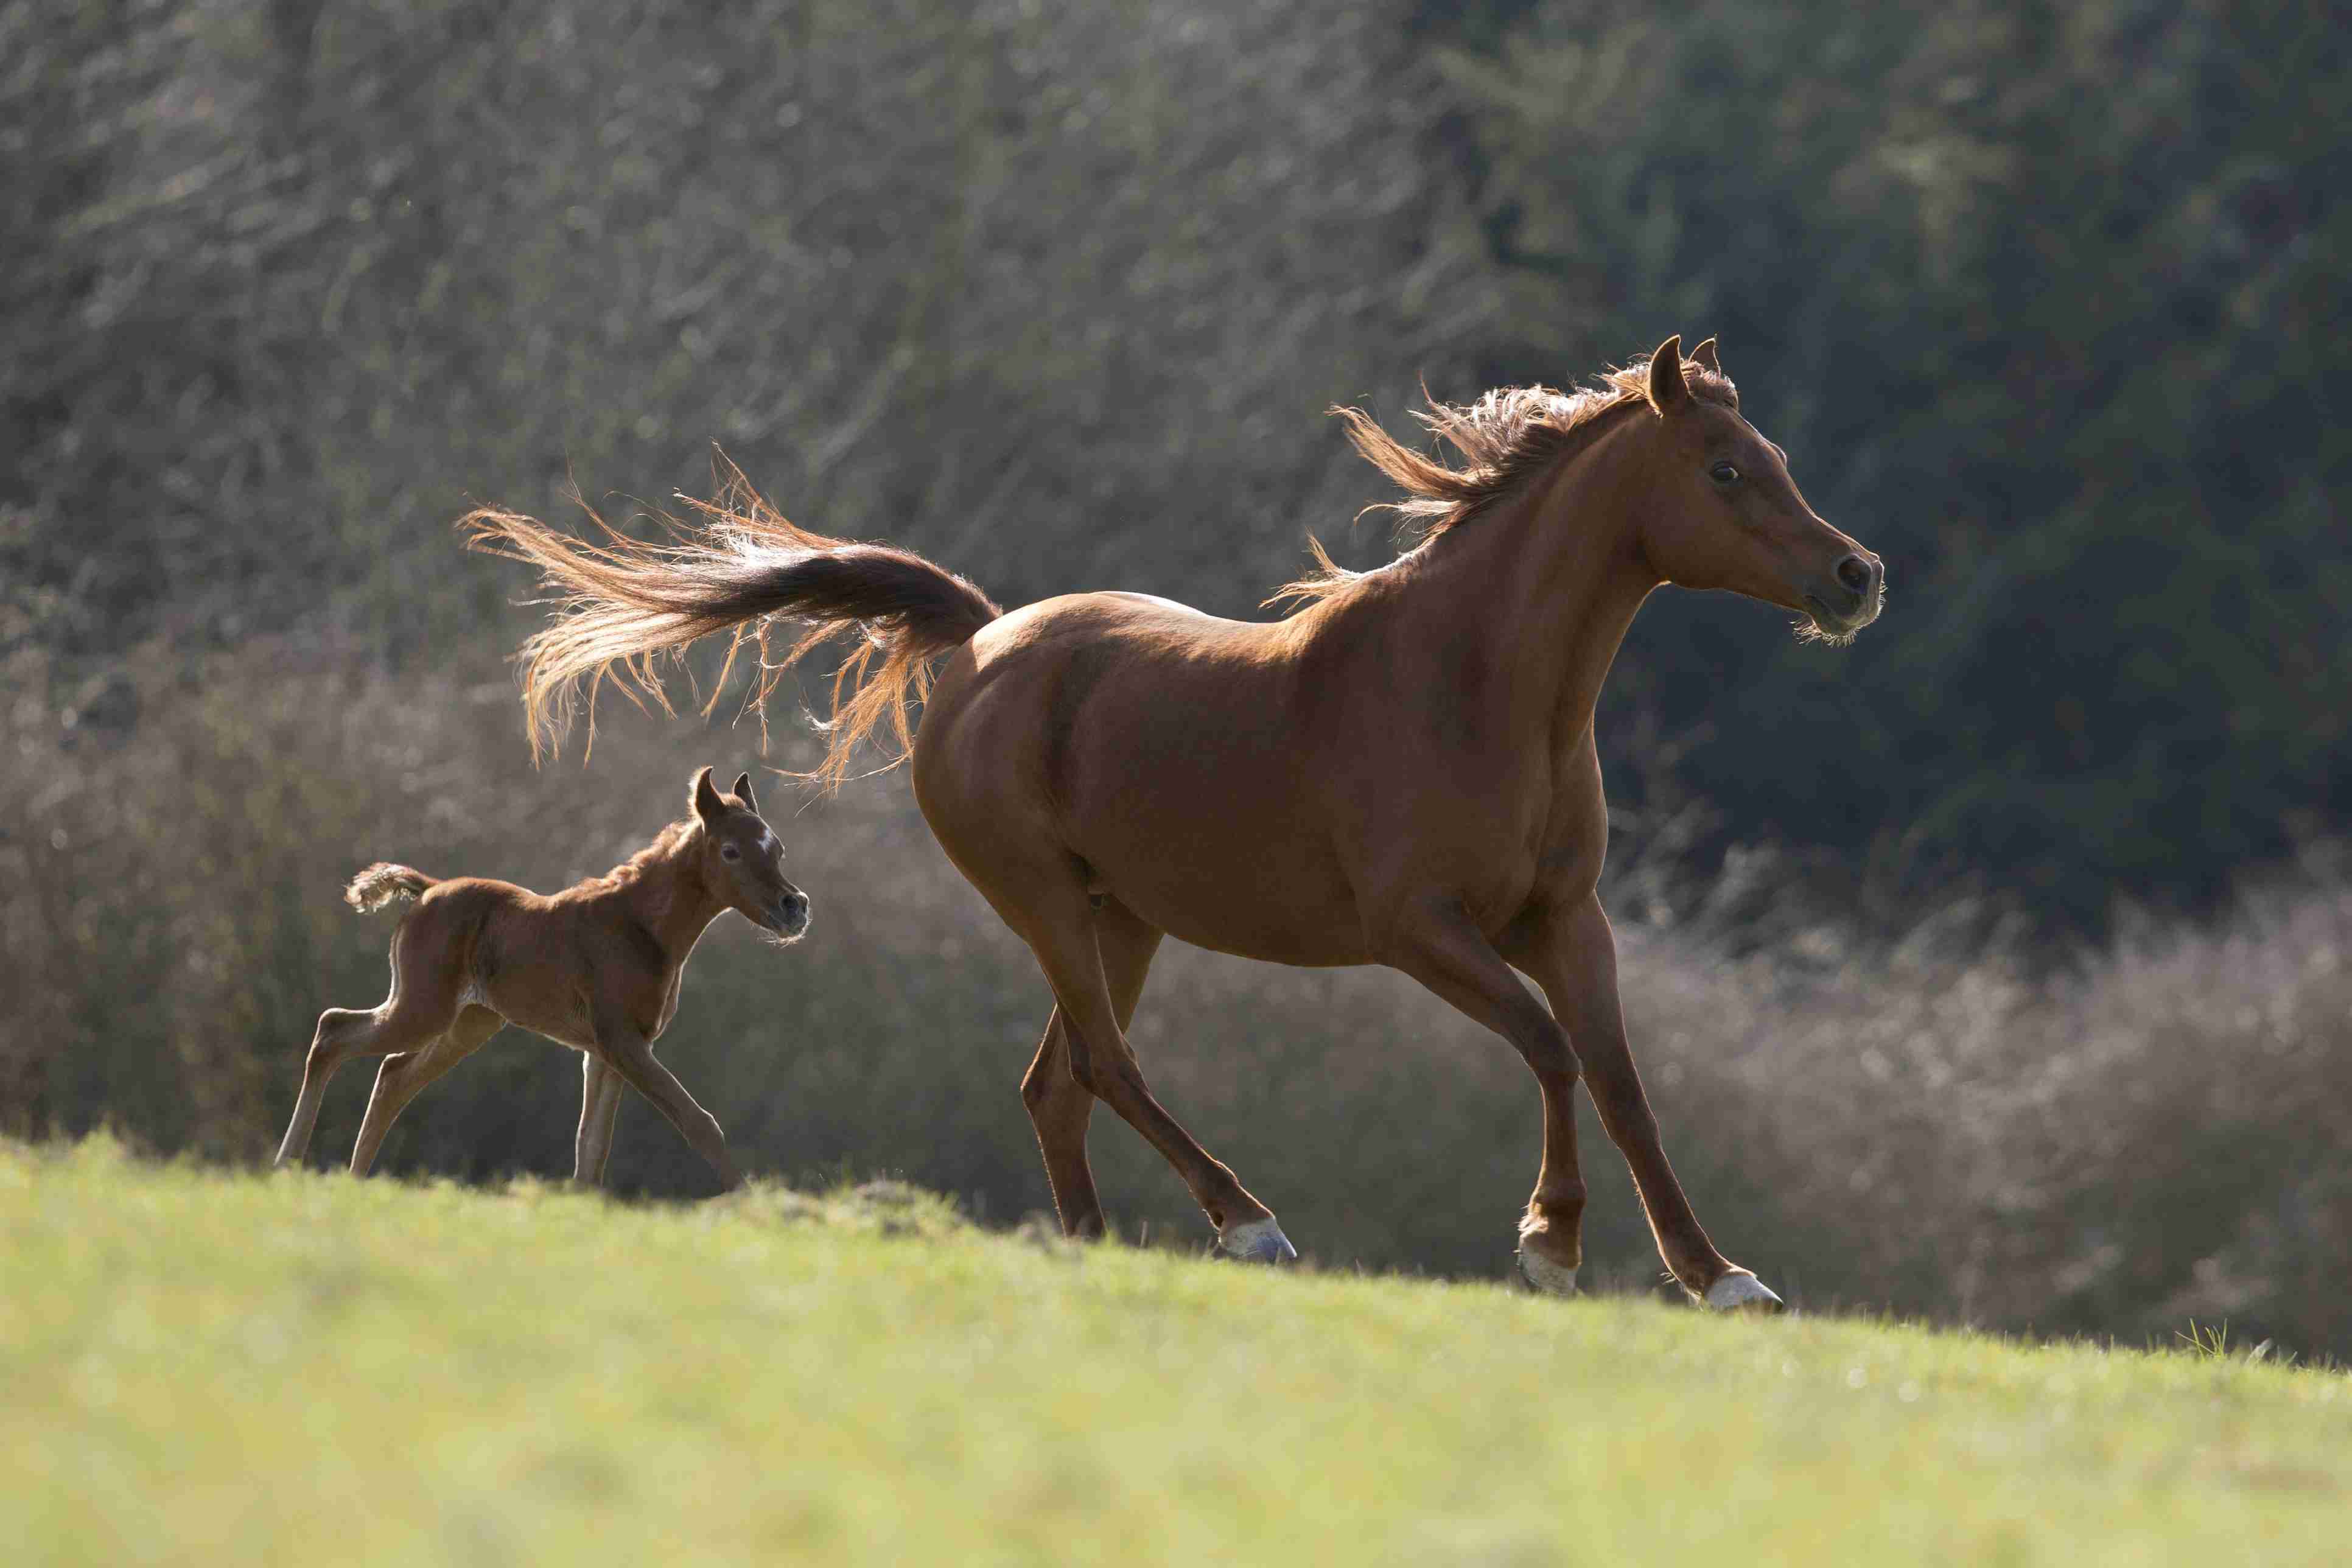 Brown Arabian mare with colt galloping